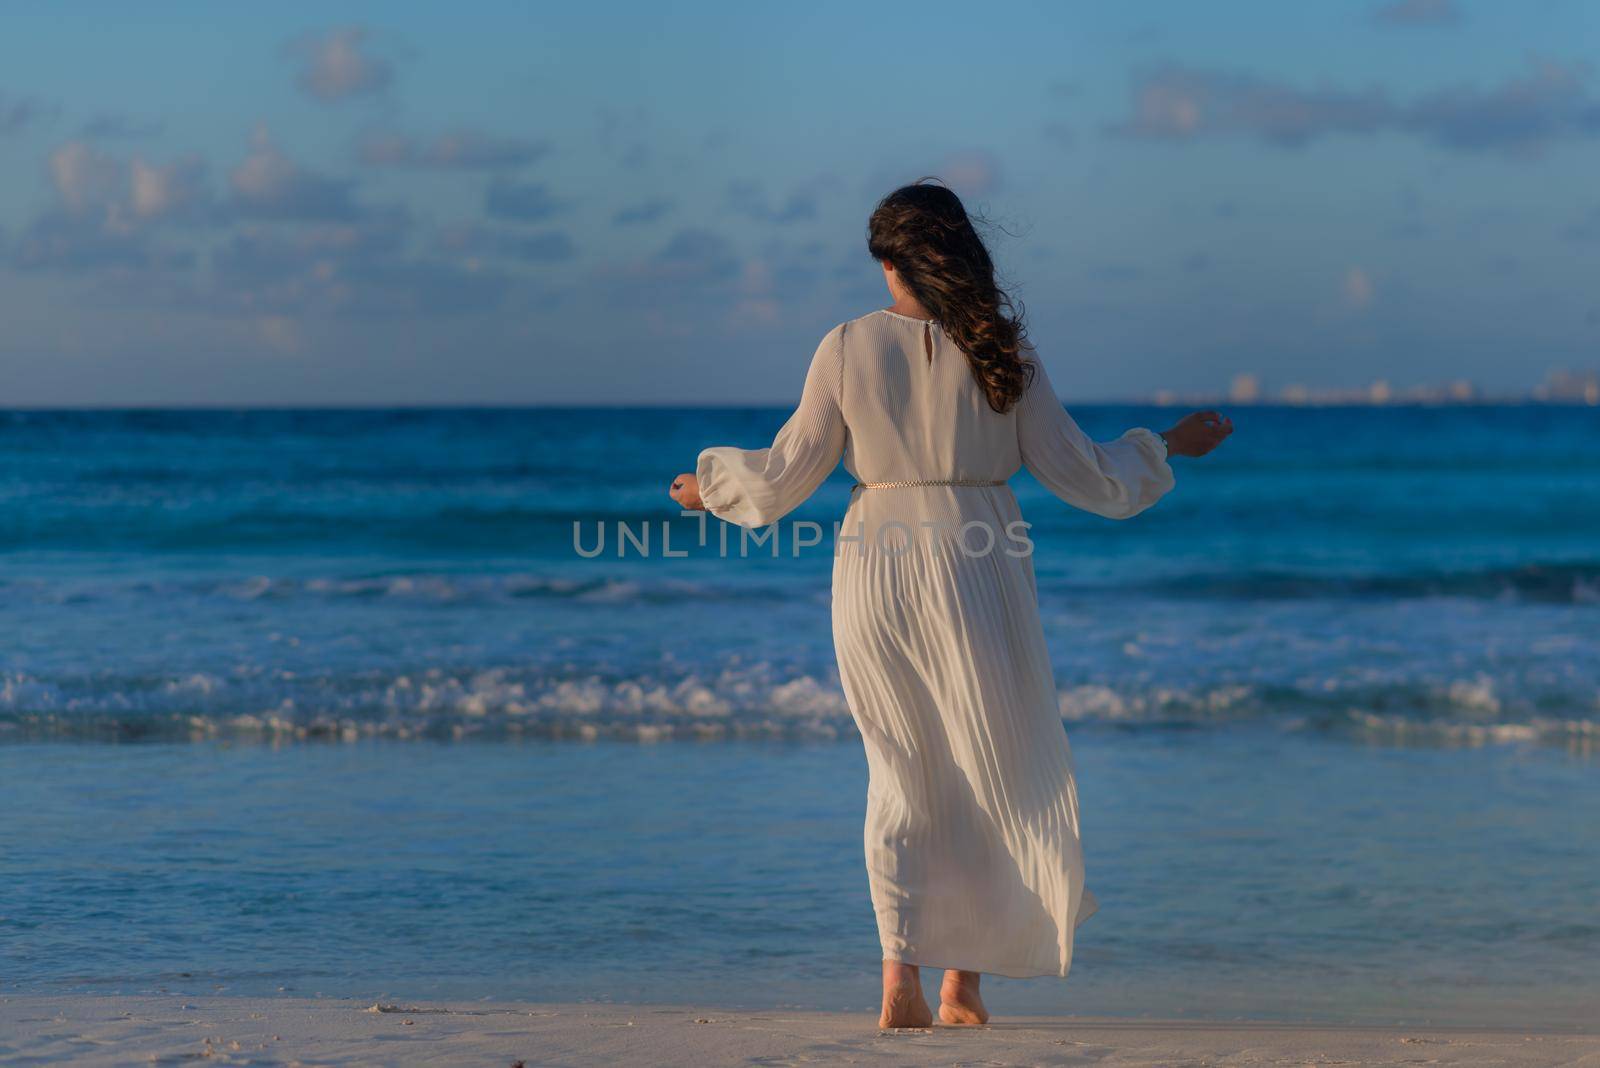 A woman on the beach looks at the horizon and walks along the beach. Mexico.